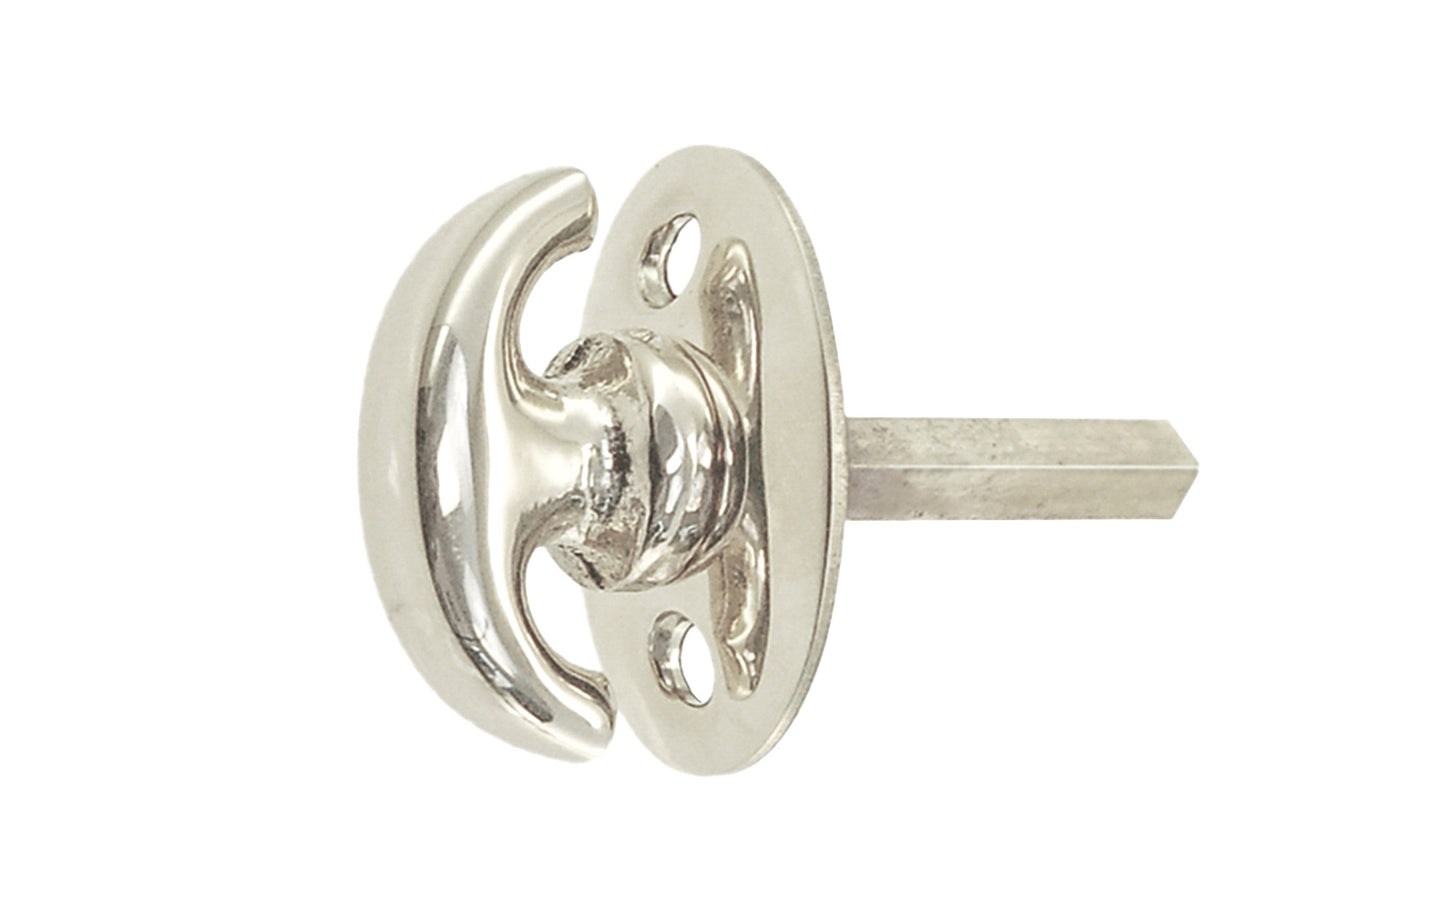 An old-style Classic Solid Brass crescent thumbturn for locking doors with a smaller oval plate. Used with mortise locks, deadbolts, night-locks, catches. Made of solid brass material. 3/16" thick shaft. Polished nickel finish.